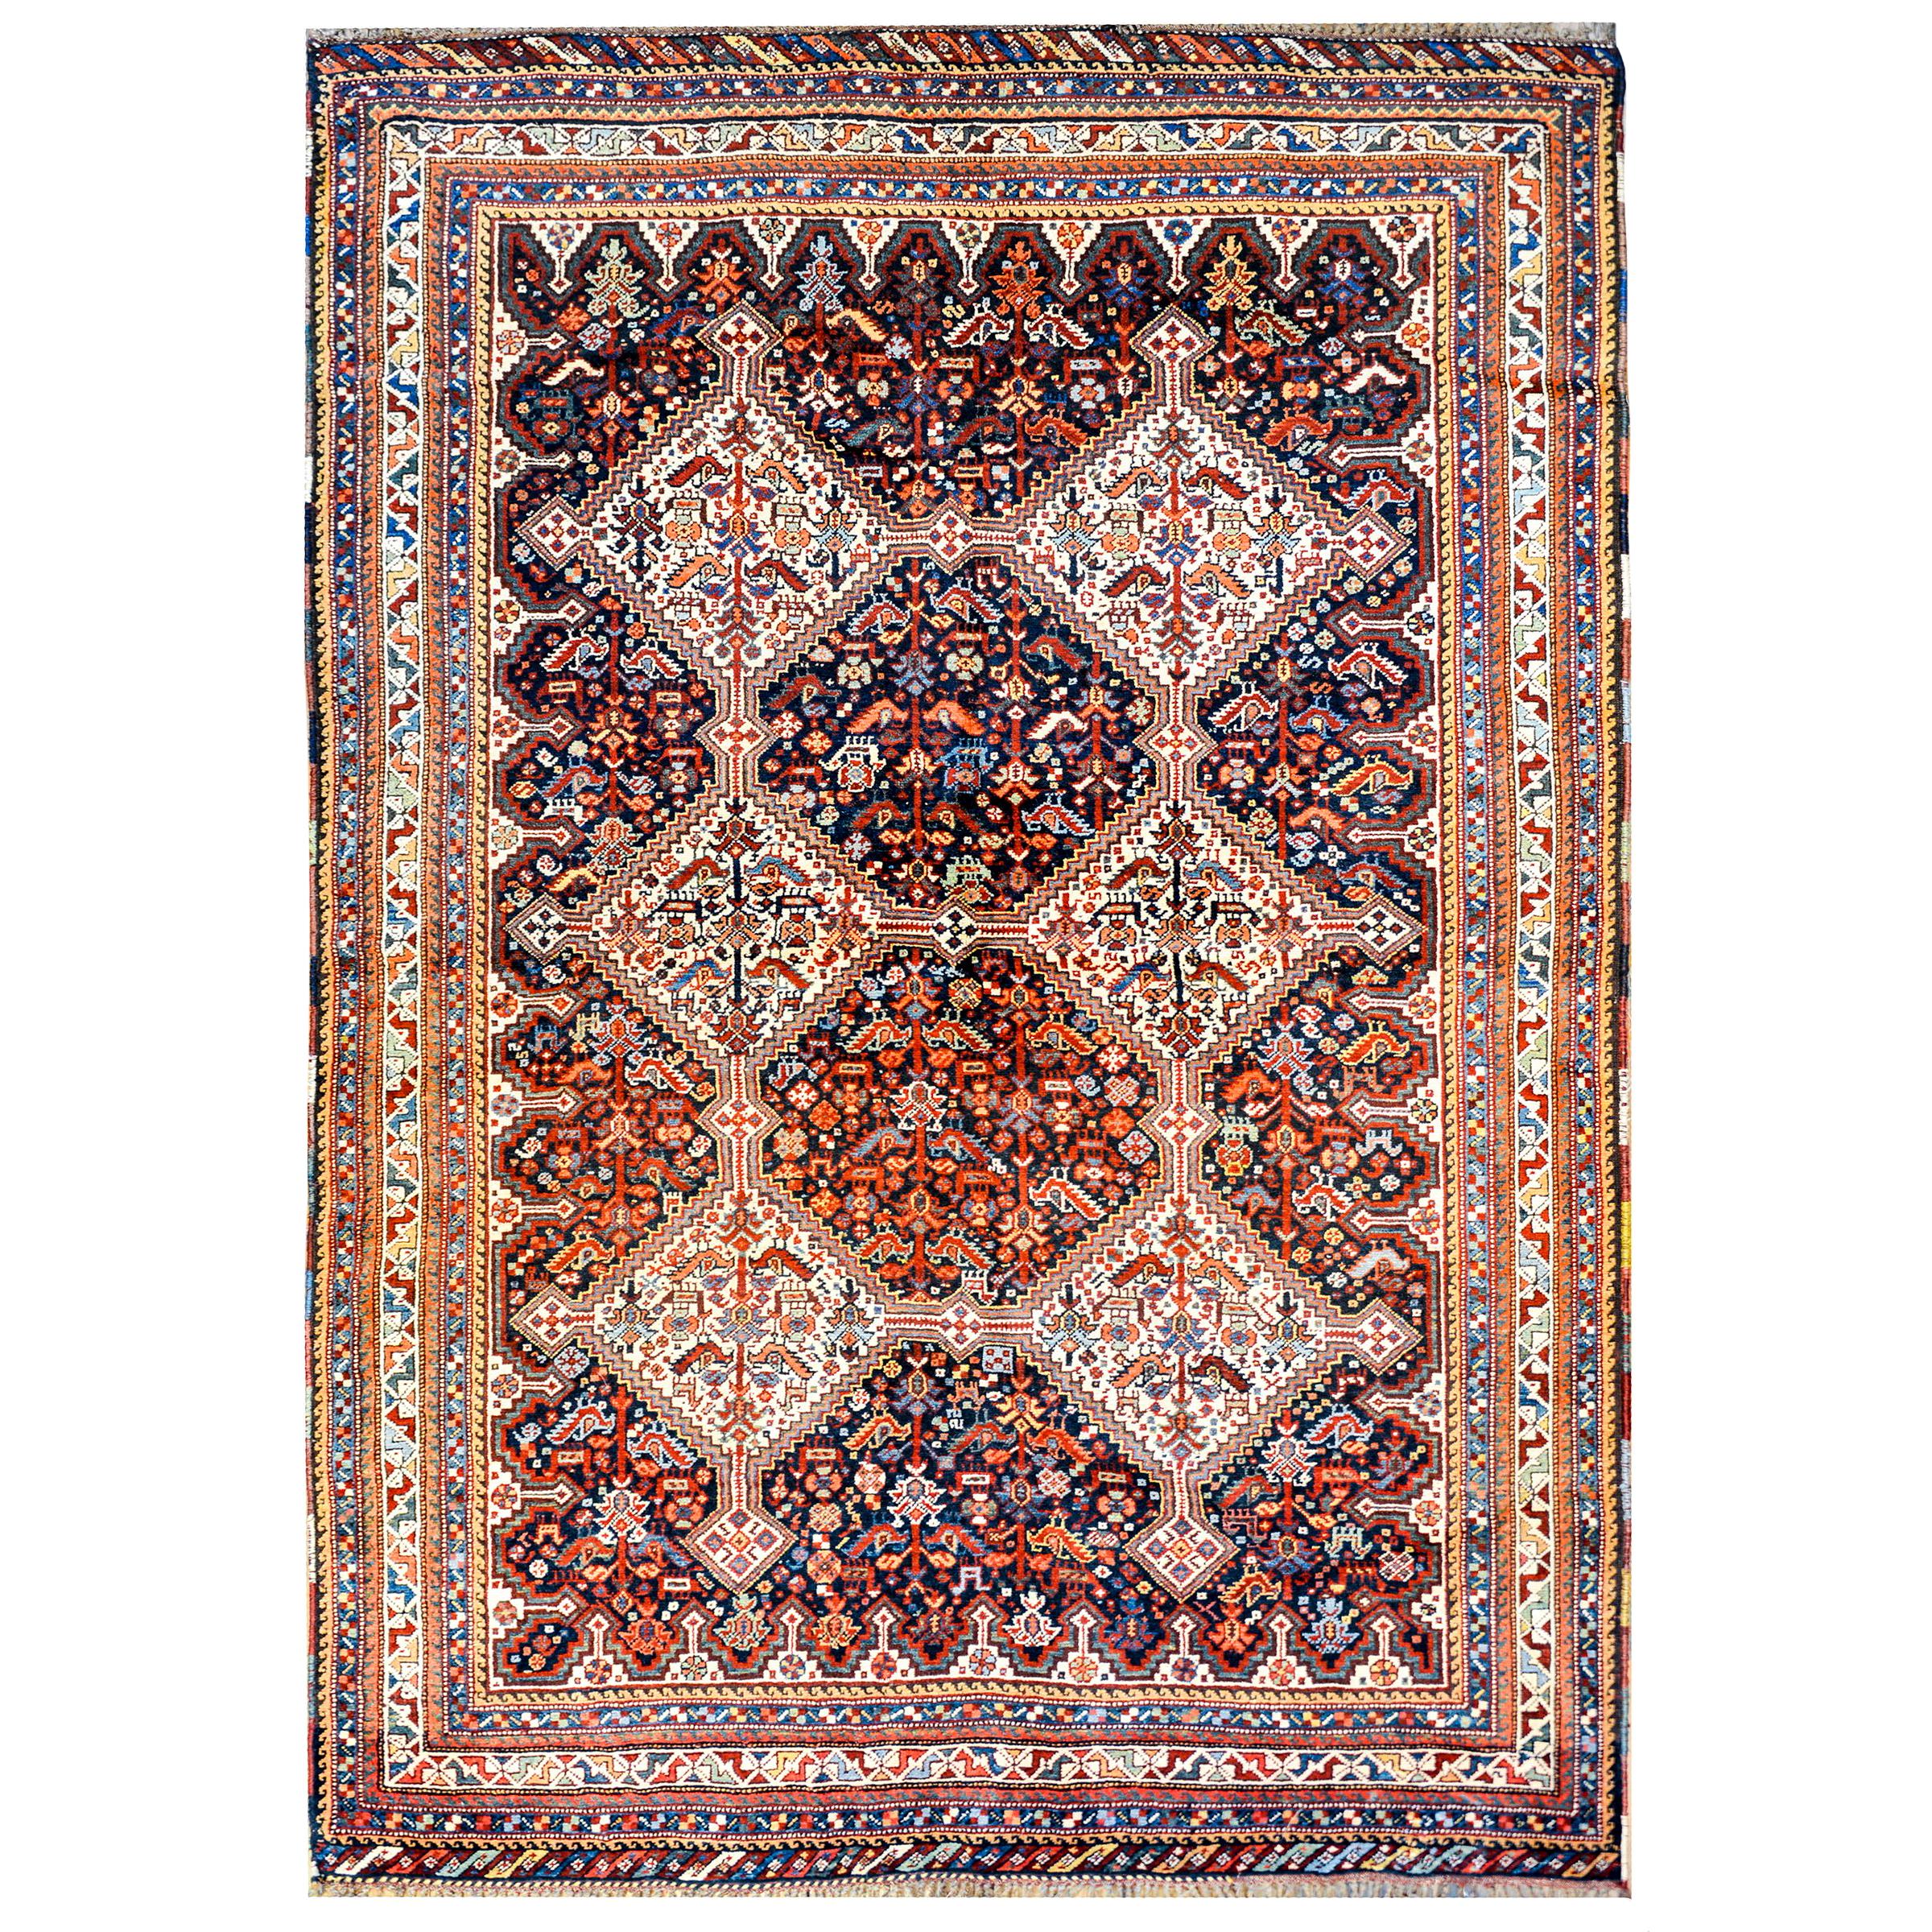 Outstanding Early 20th Century Kamseh Rug